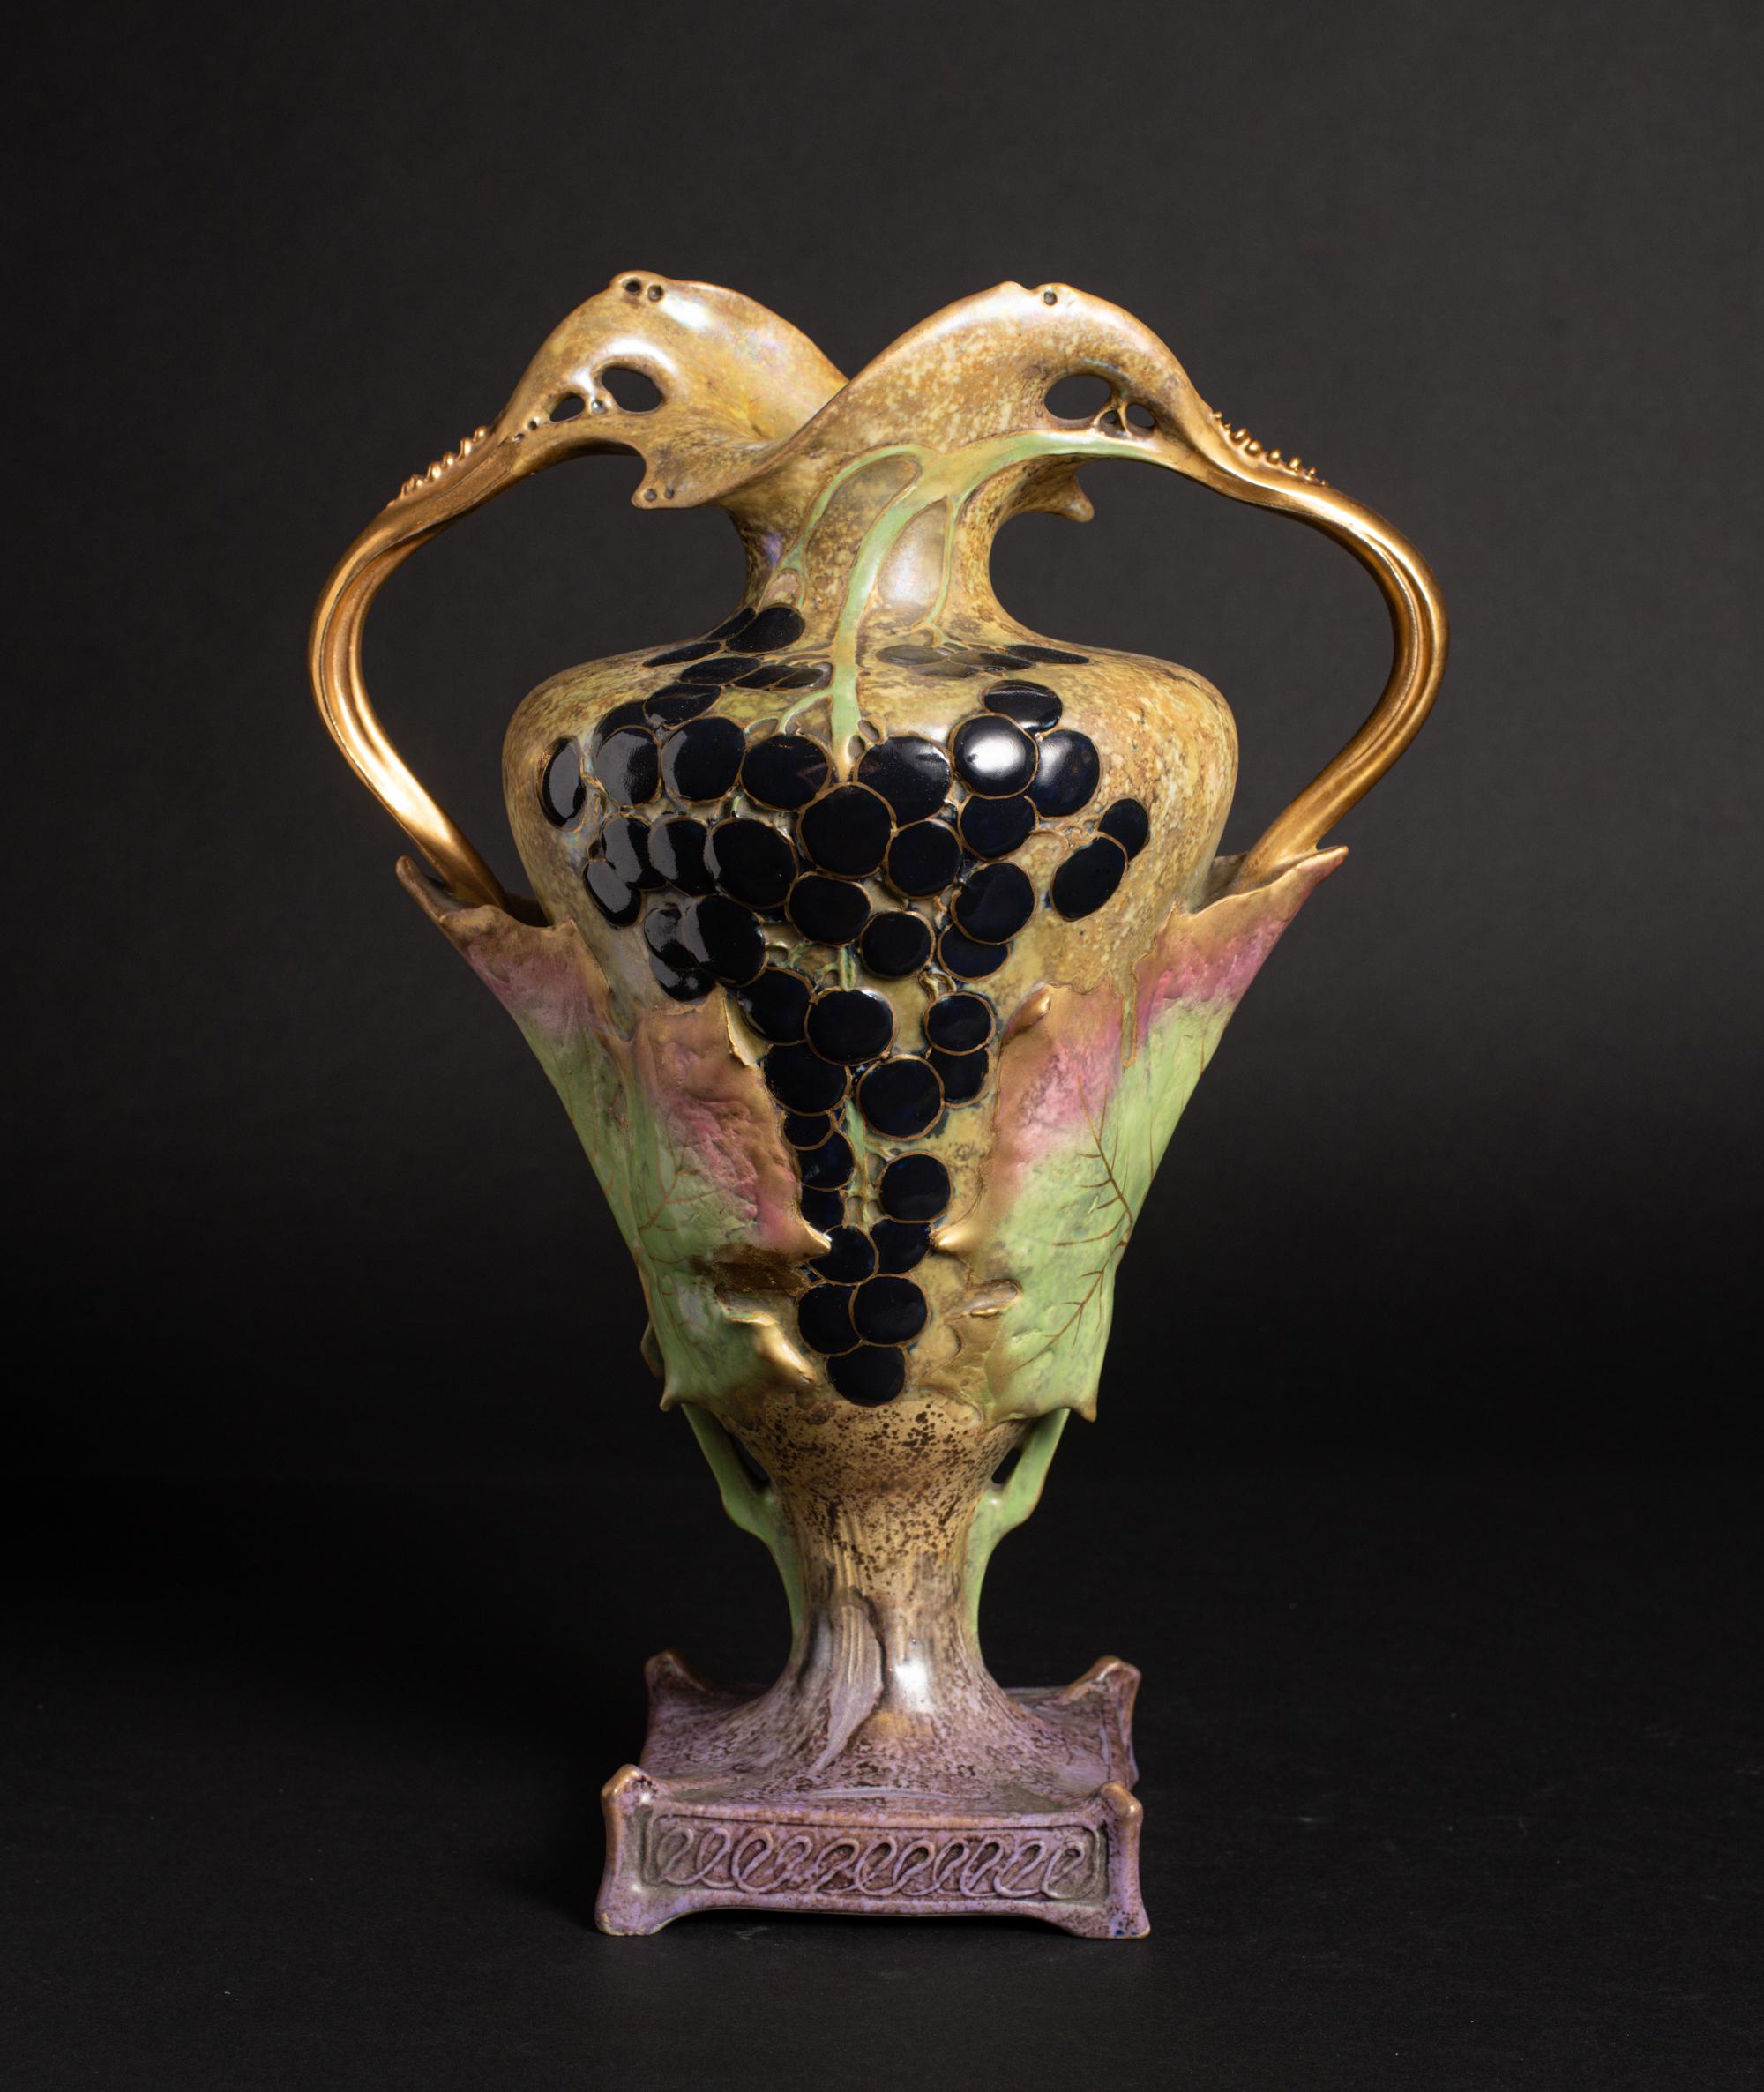 Model #3425

Highly stylized vase with grape vine motif and secessionist handles.

Paul Dachsel was the son-in-law of Alfred Stellmacher, the founder of Amphora Pottery company in Turn-Teplitz, then in Austria. Very little is known or was written